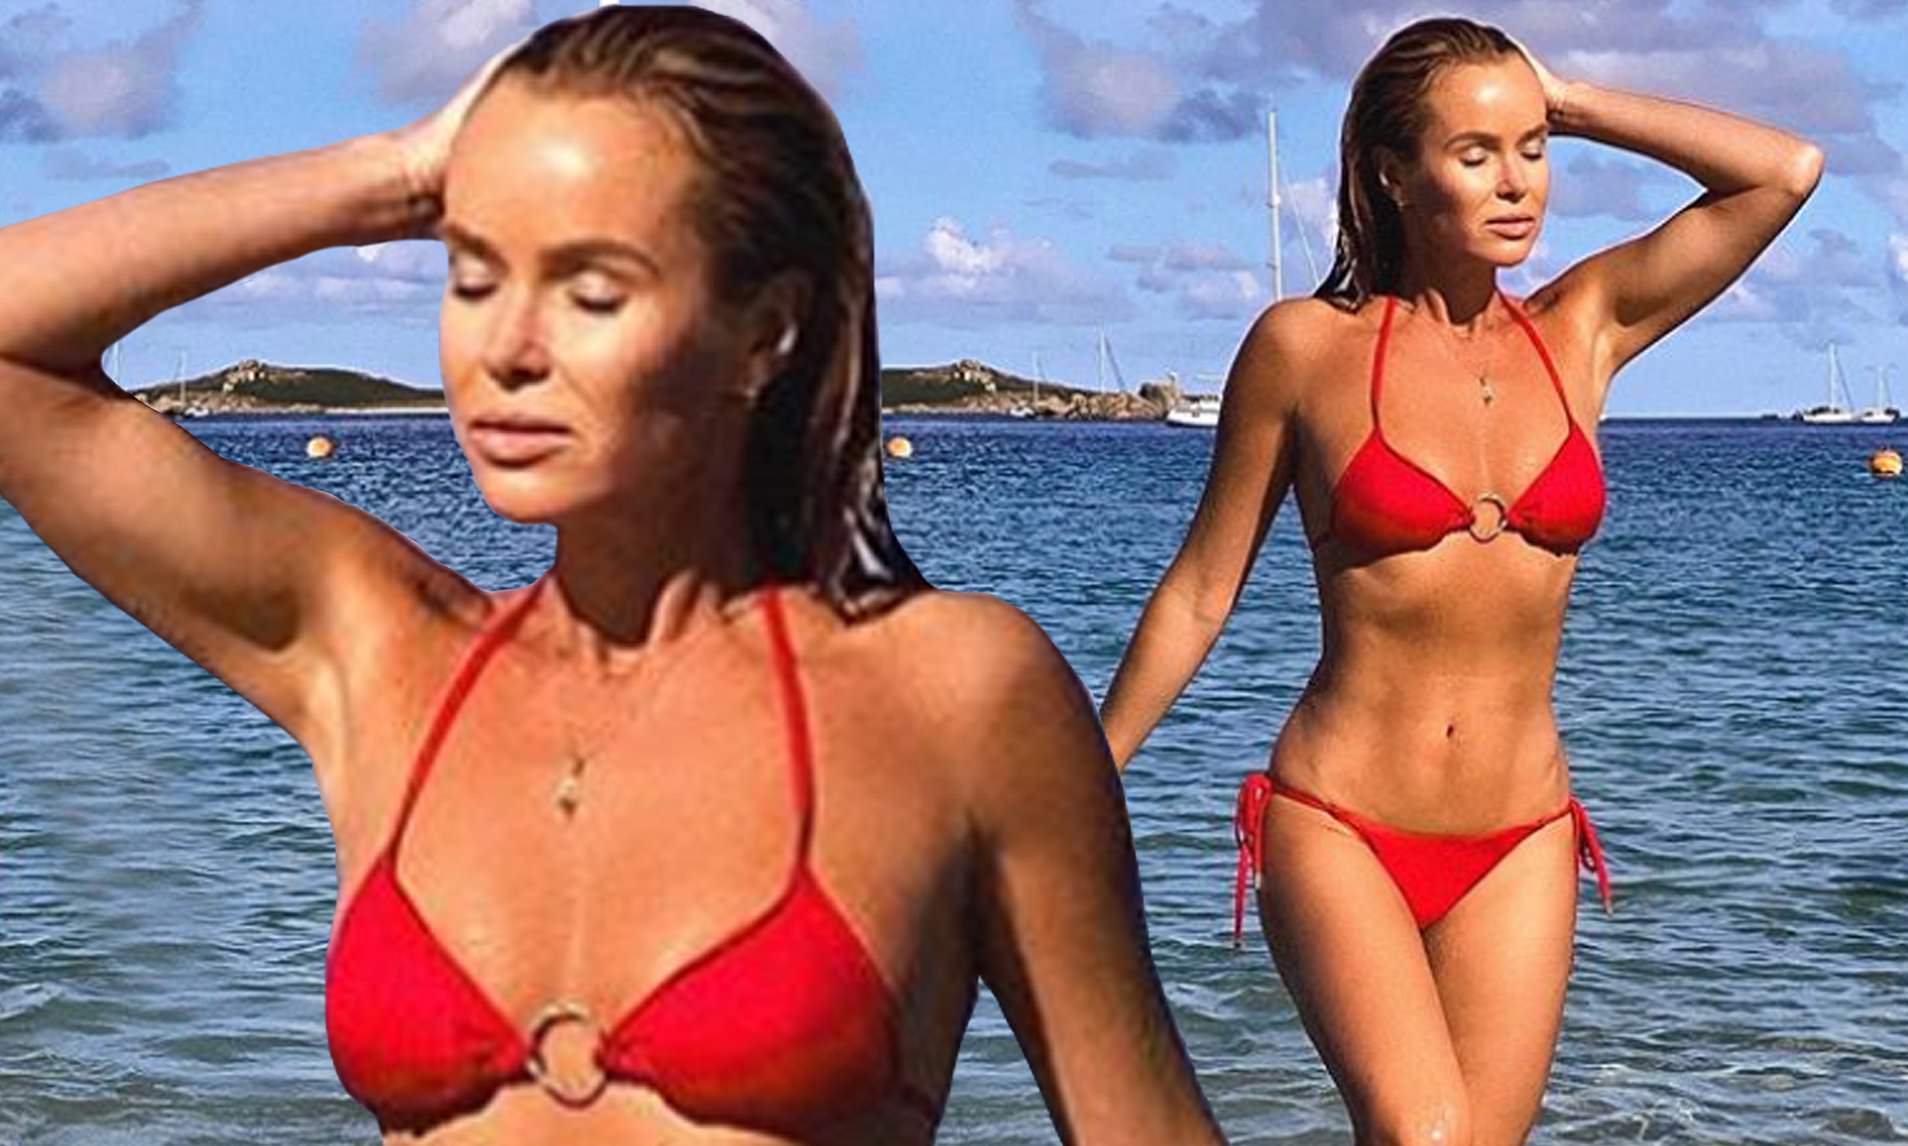 Amanda Holden S British Staycation Photos Brought Out The Internet S